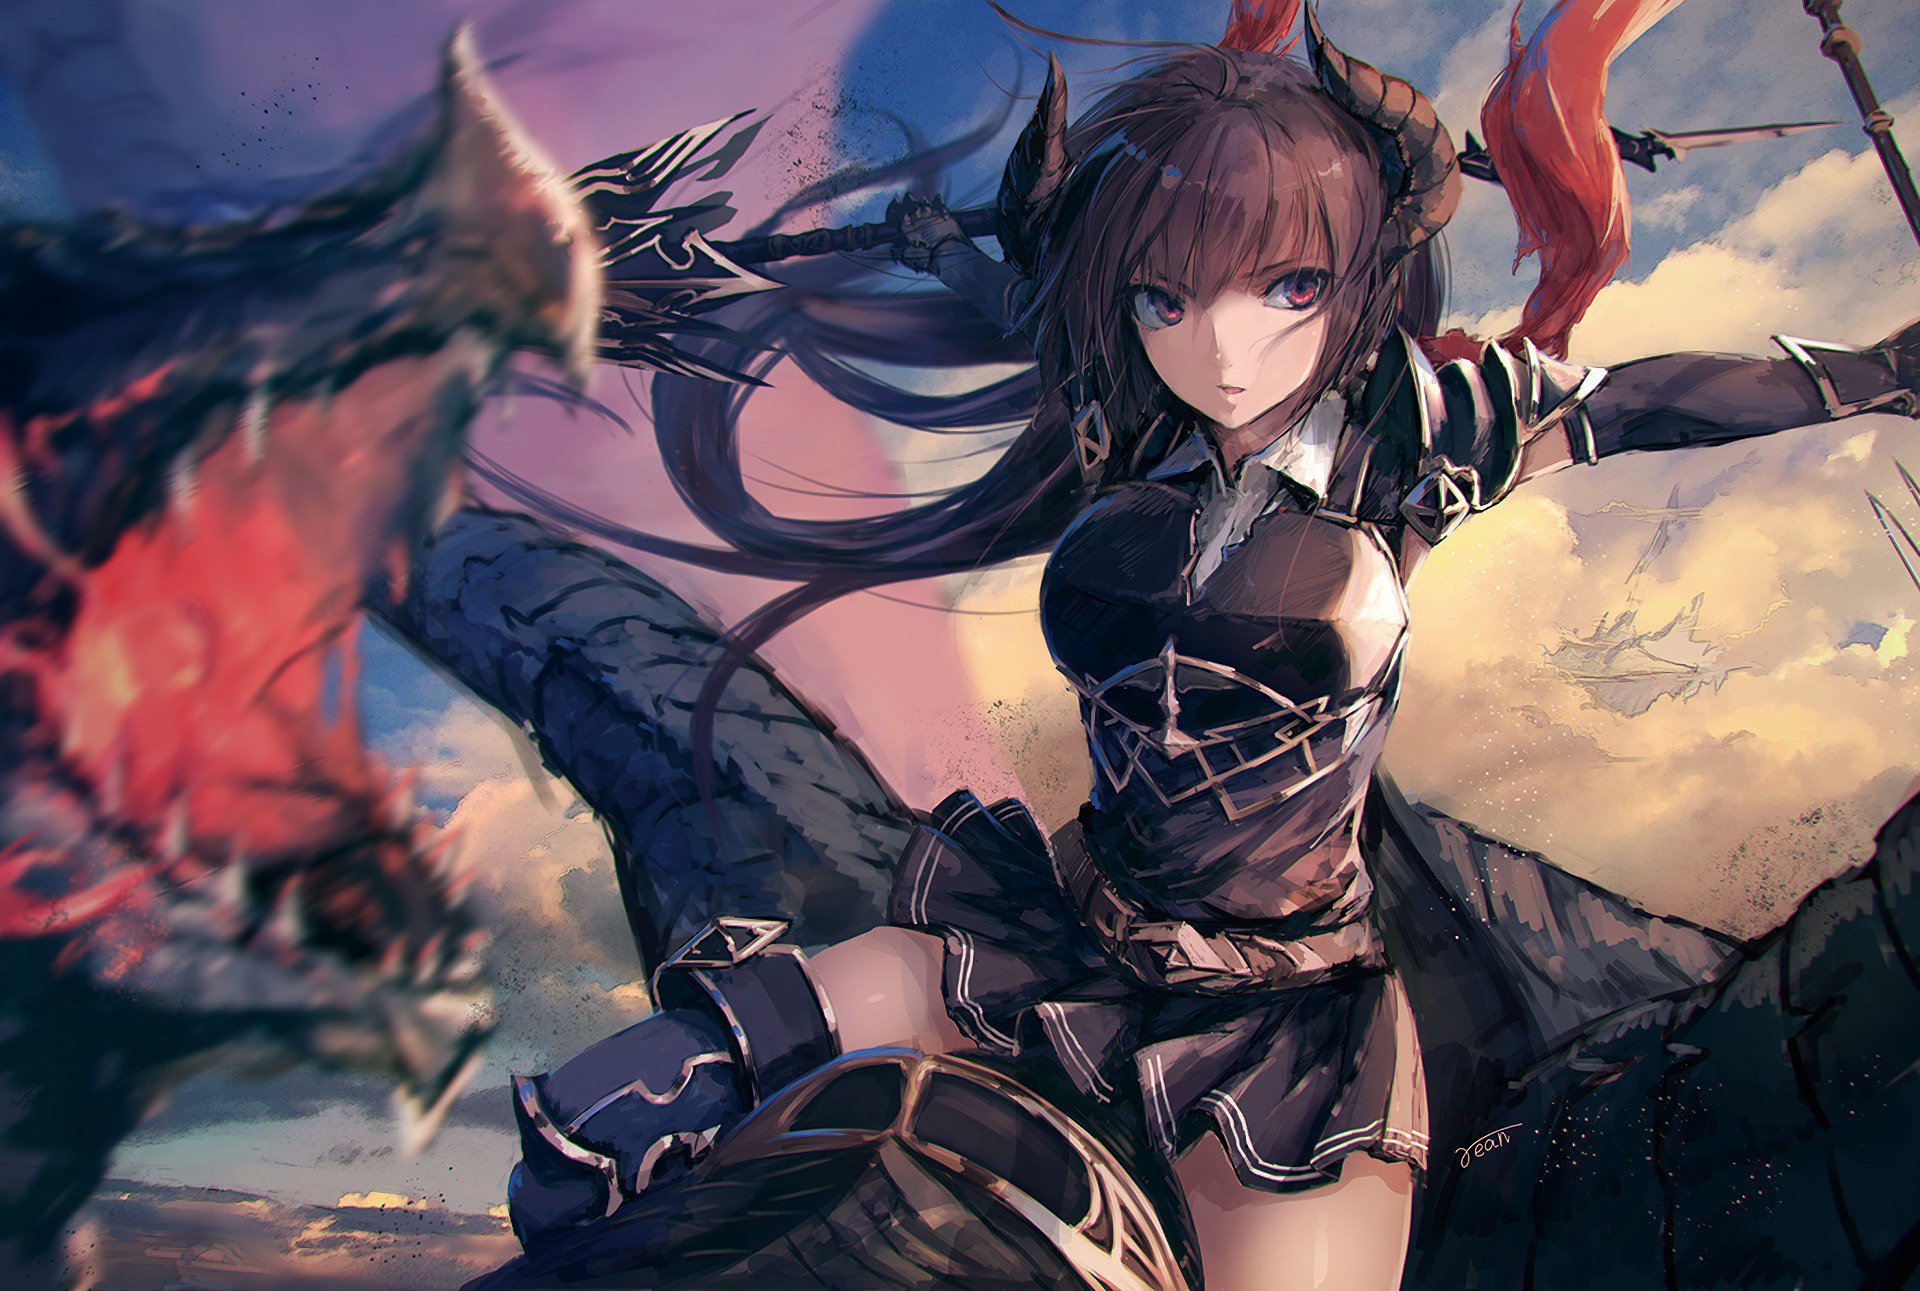 Dragonfox Gaming Found Three Great Wallpapers For Shadowverse Wish I Could Have Found A Good One For Luna She S Gotta Be One Of My Favorite Characters T Co Pfuljndkla